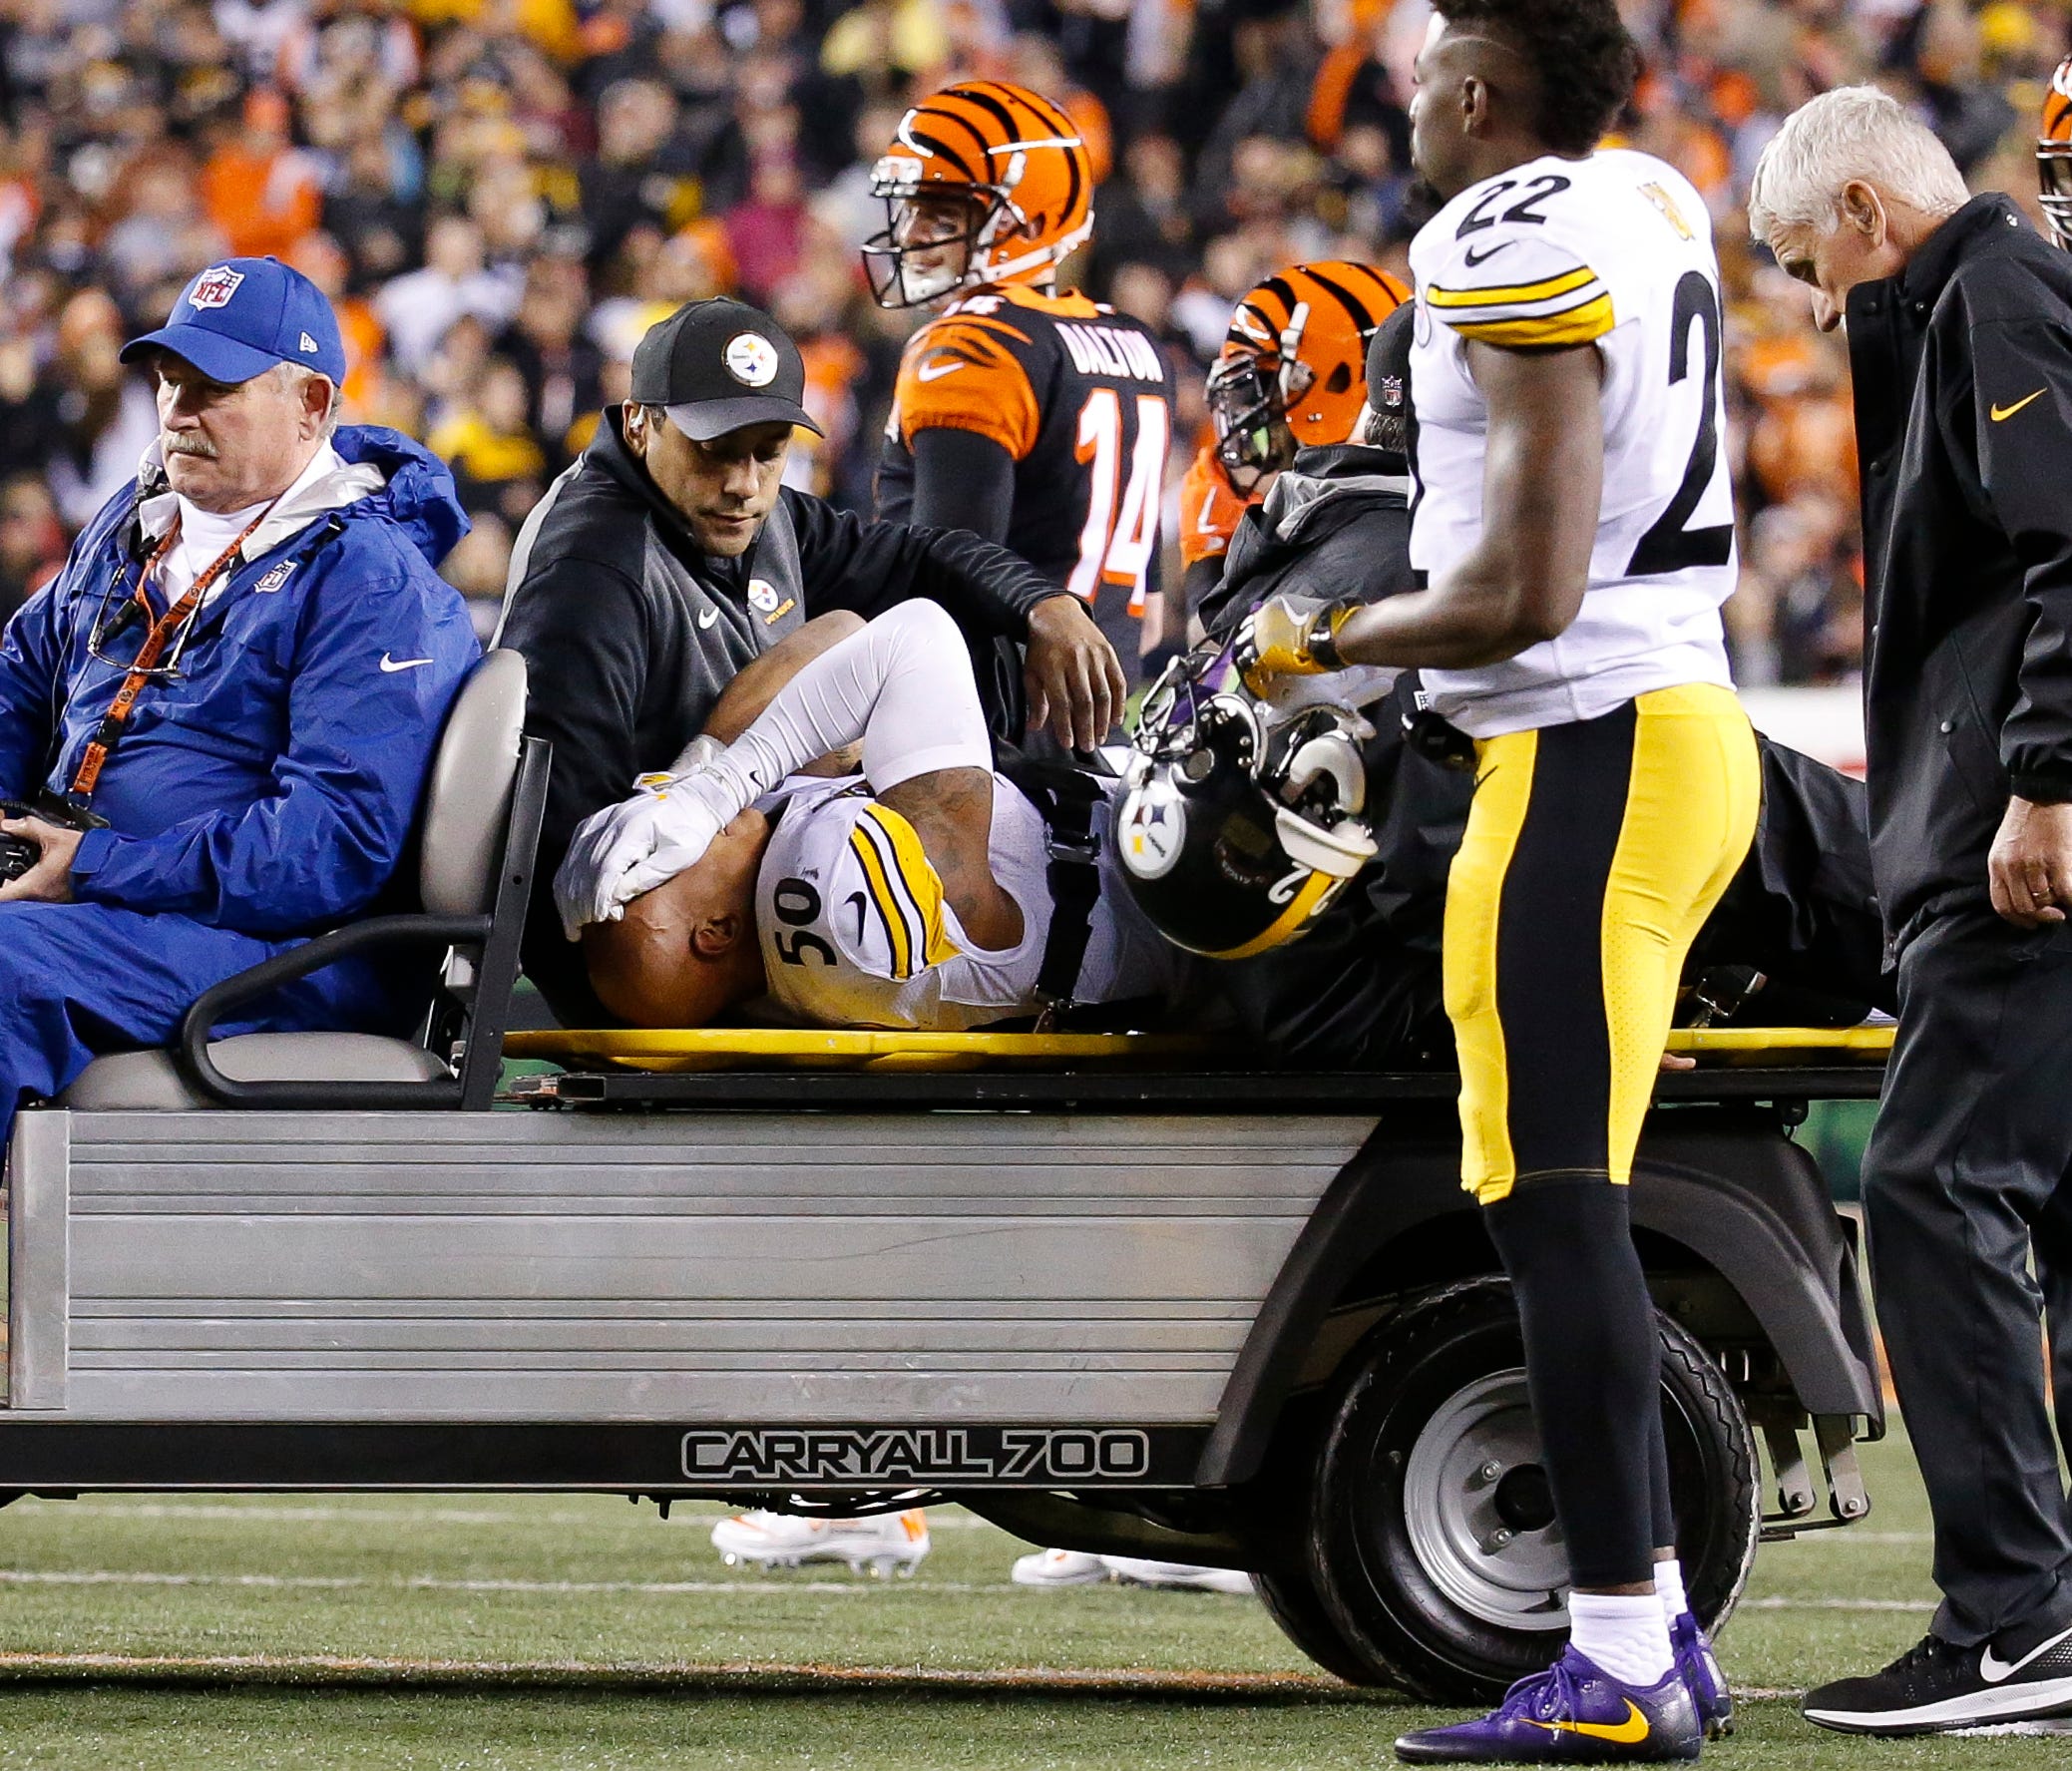 Pittsburgh Steelers inside linebacker Ryan Shazier (50) is carted off the field after an apparent injury in the first half of an NFL football game against the Cincinnati Bengals, Monday, Dec. 4, 2017, in Cincinnati.